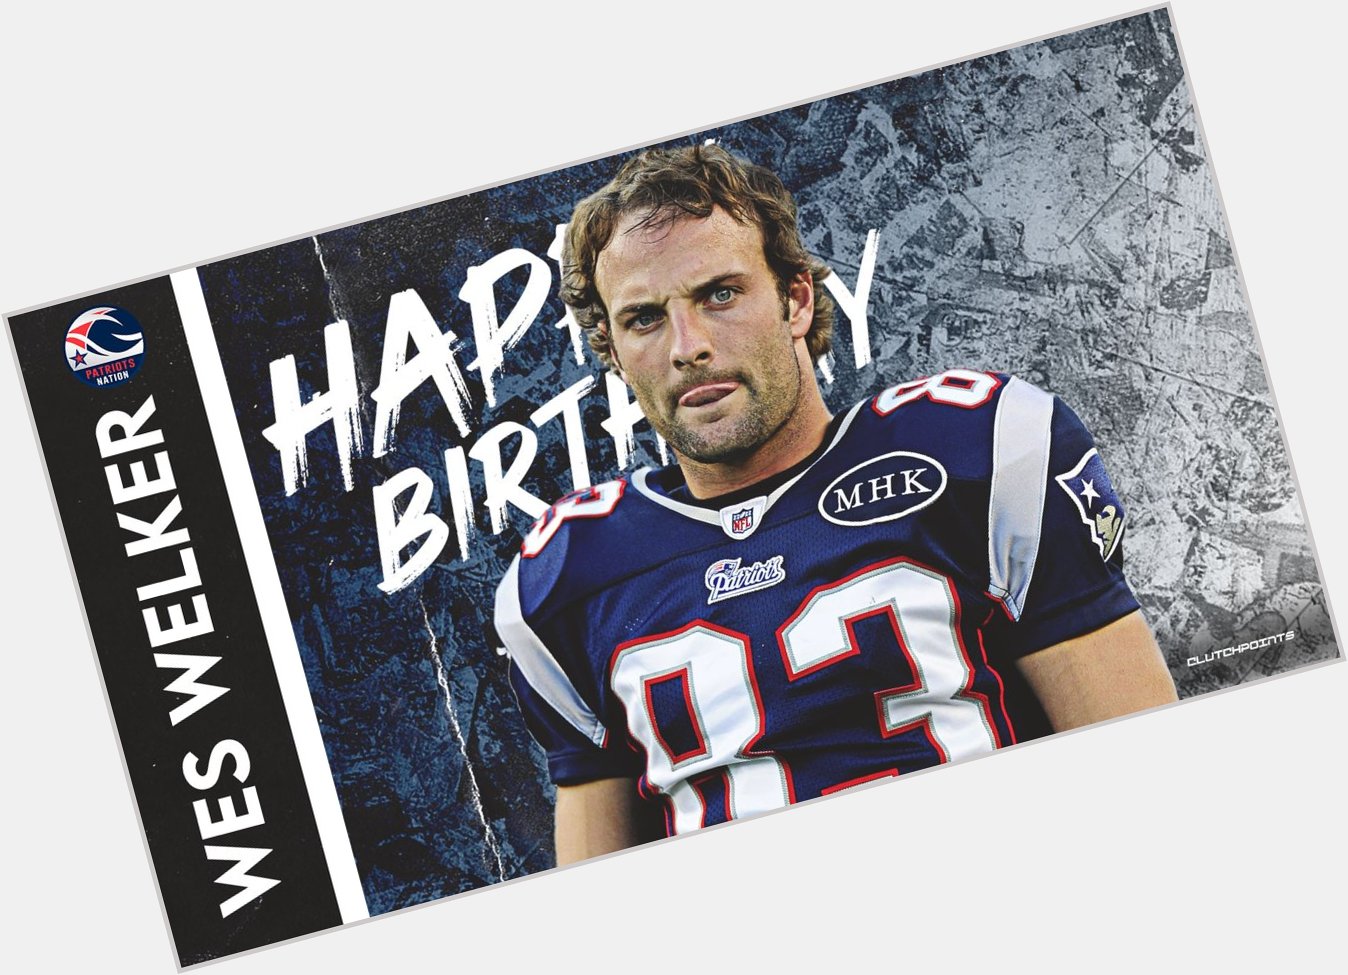 Patriots Nation, let\s all wish 5x Pro Bowler and 3x NFL receptions leader, Wes Welker a Happy 40th Birthday!  